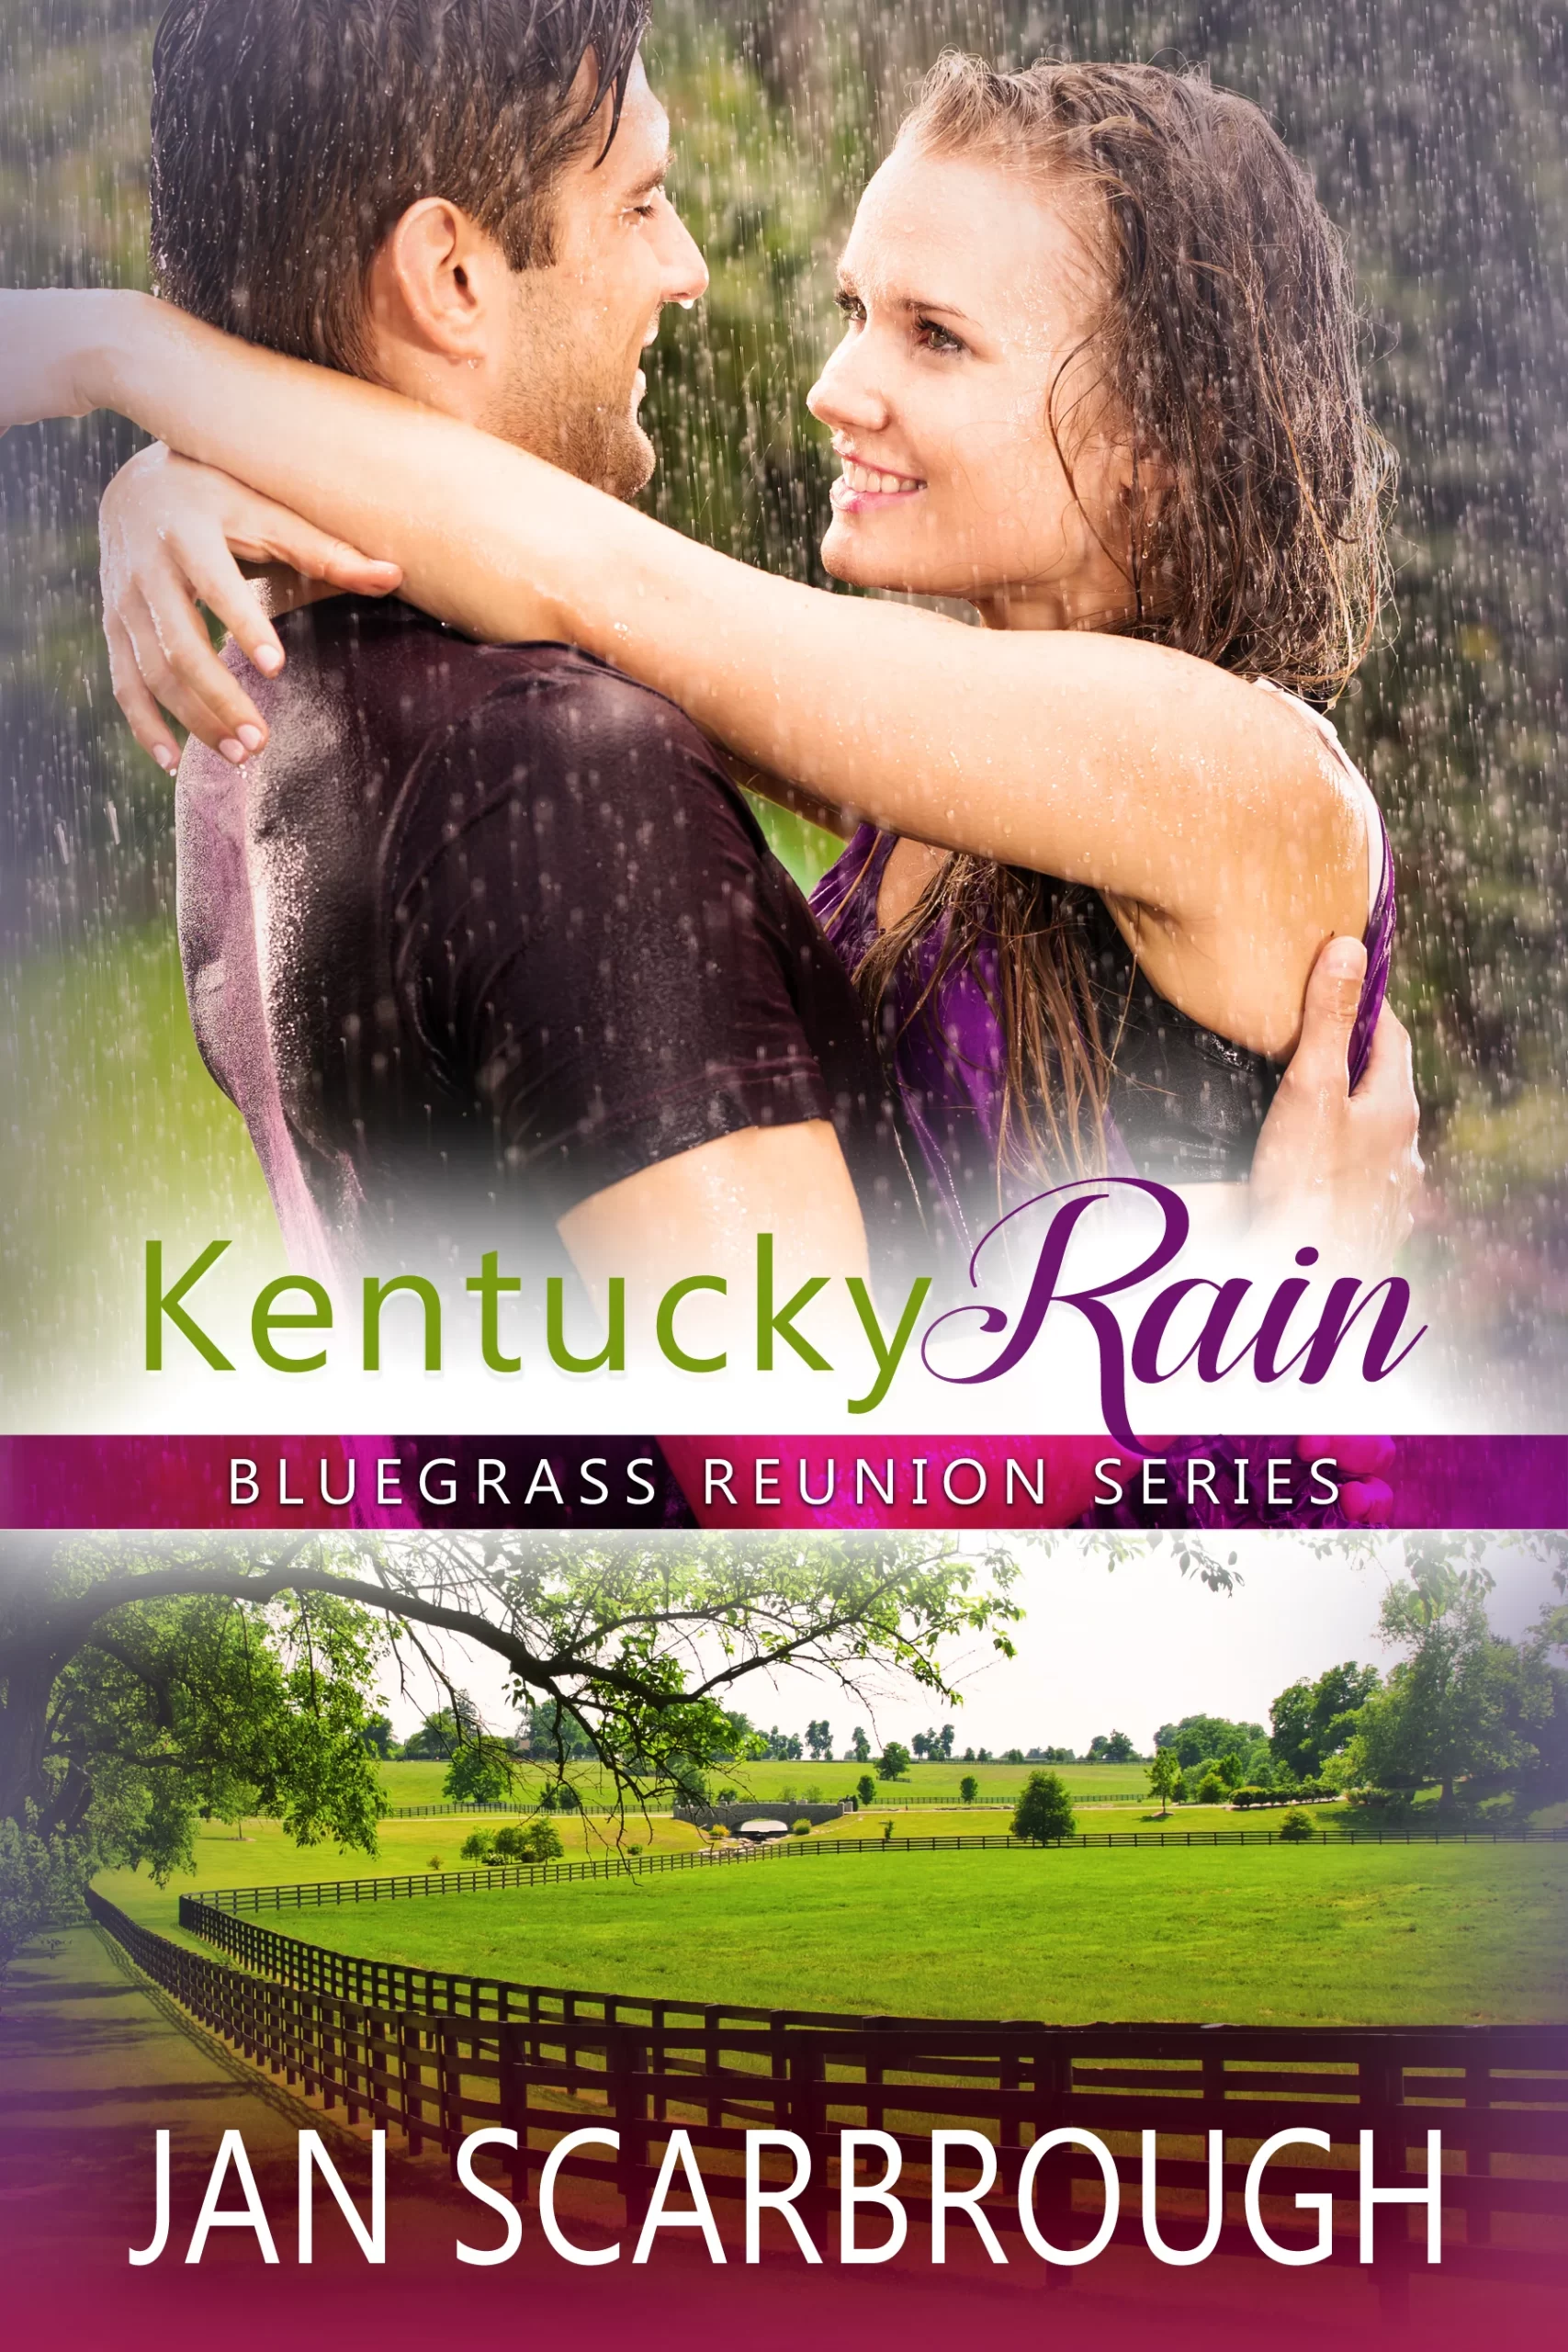 A book cover of "Kentucky Rain" by Jan Scarbrough of a couple with their arms around each other, smiling, in the rain.